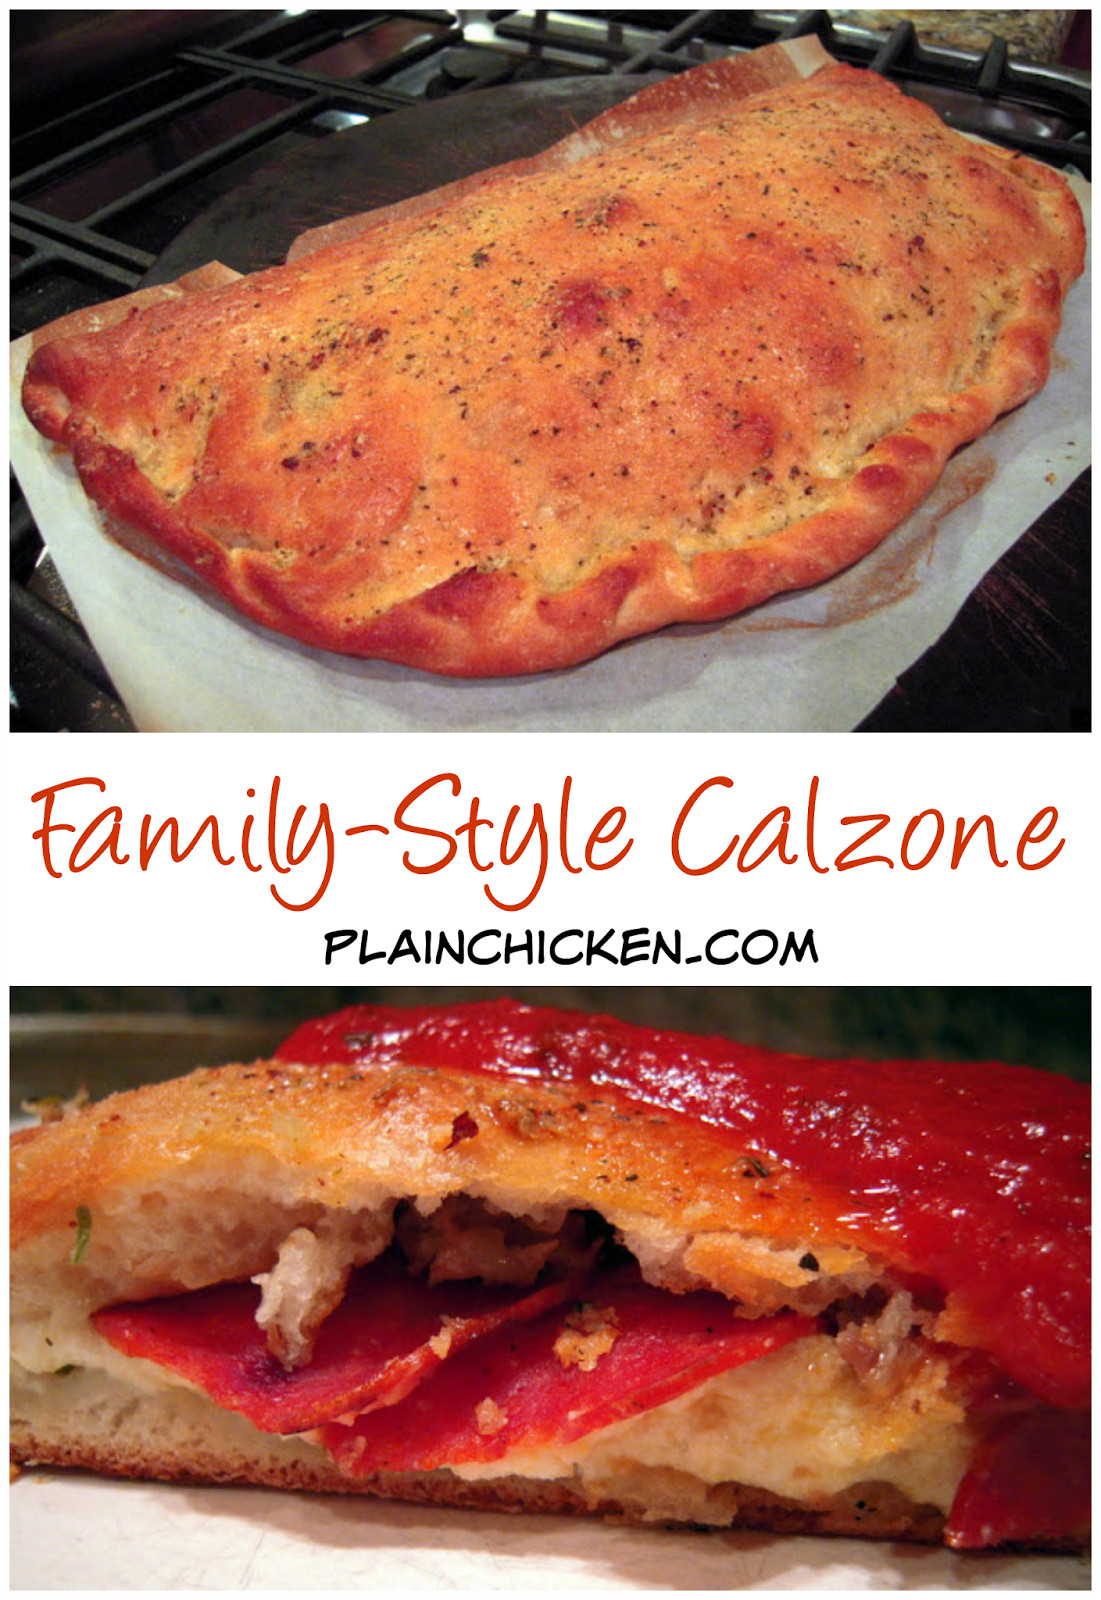 Top 30 Calzone Recipe with Pizza Dough - Home, Family, Style and Art Ideas